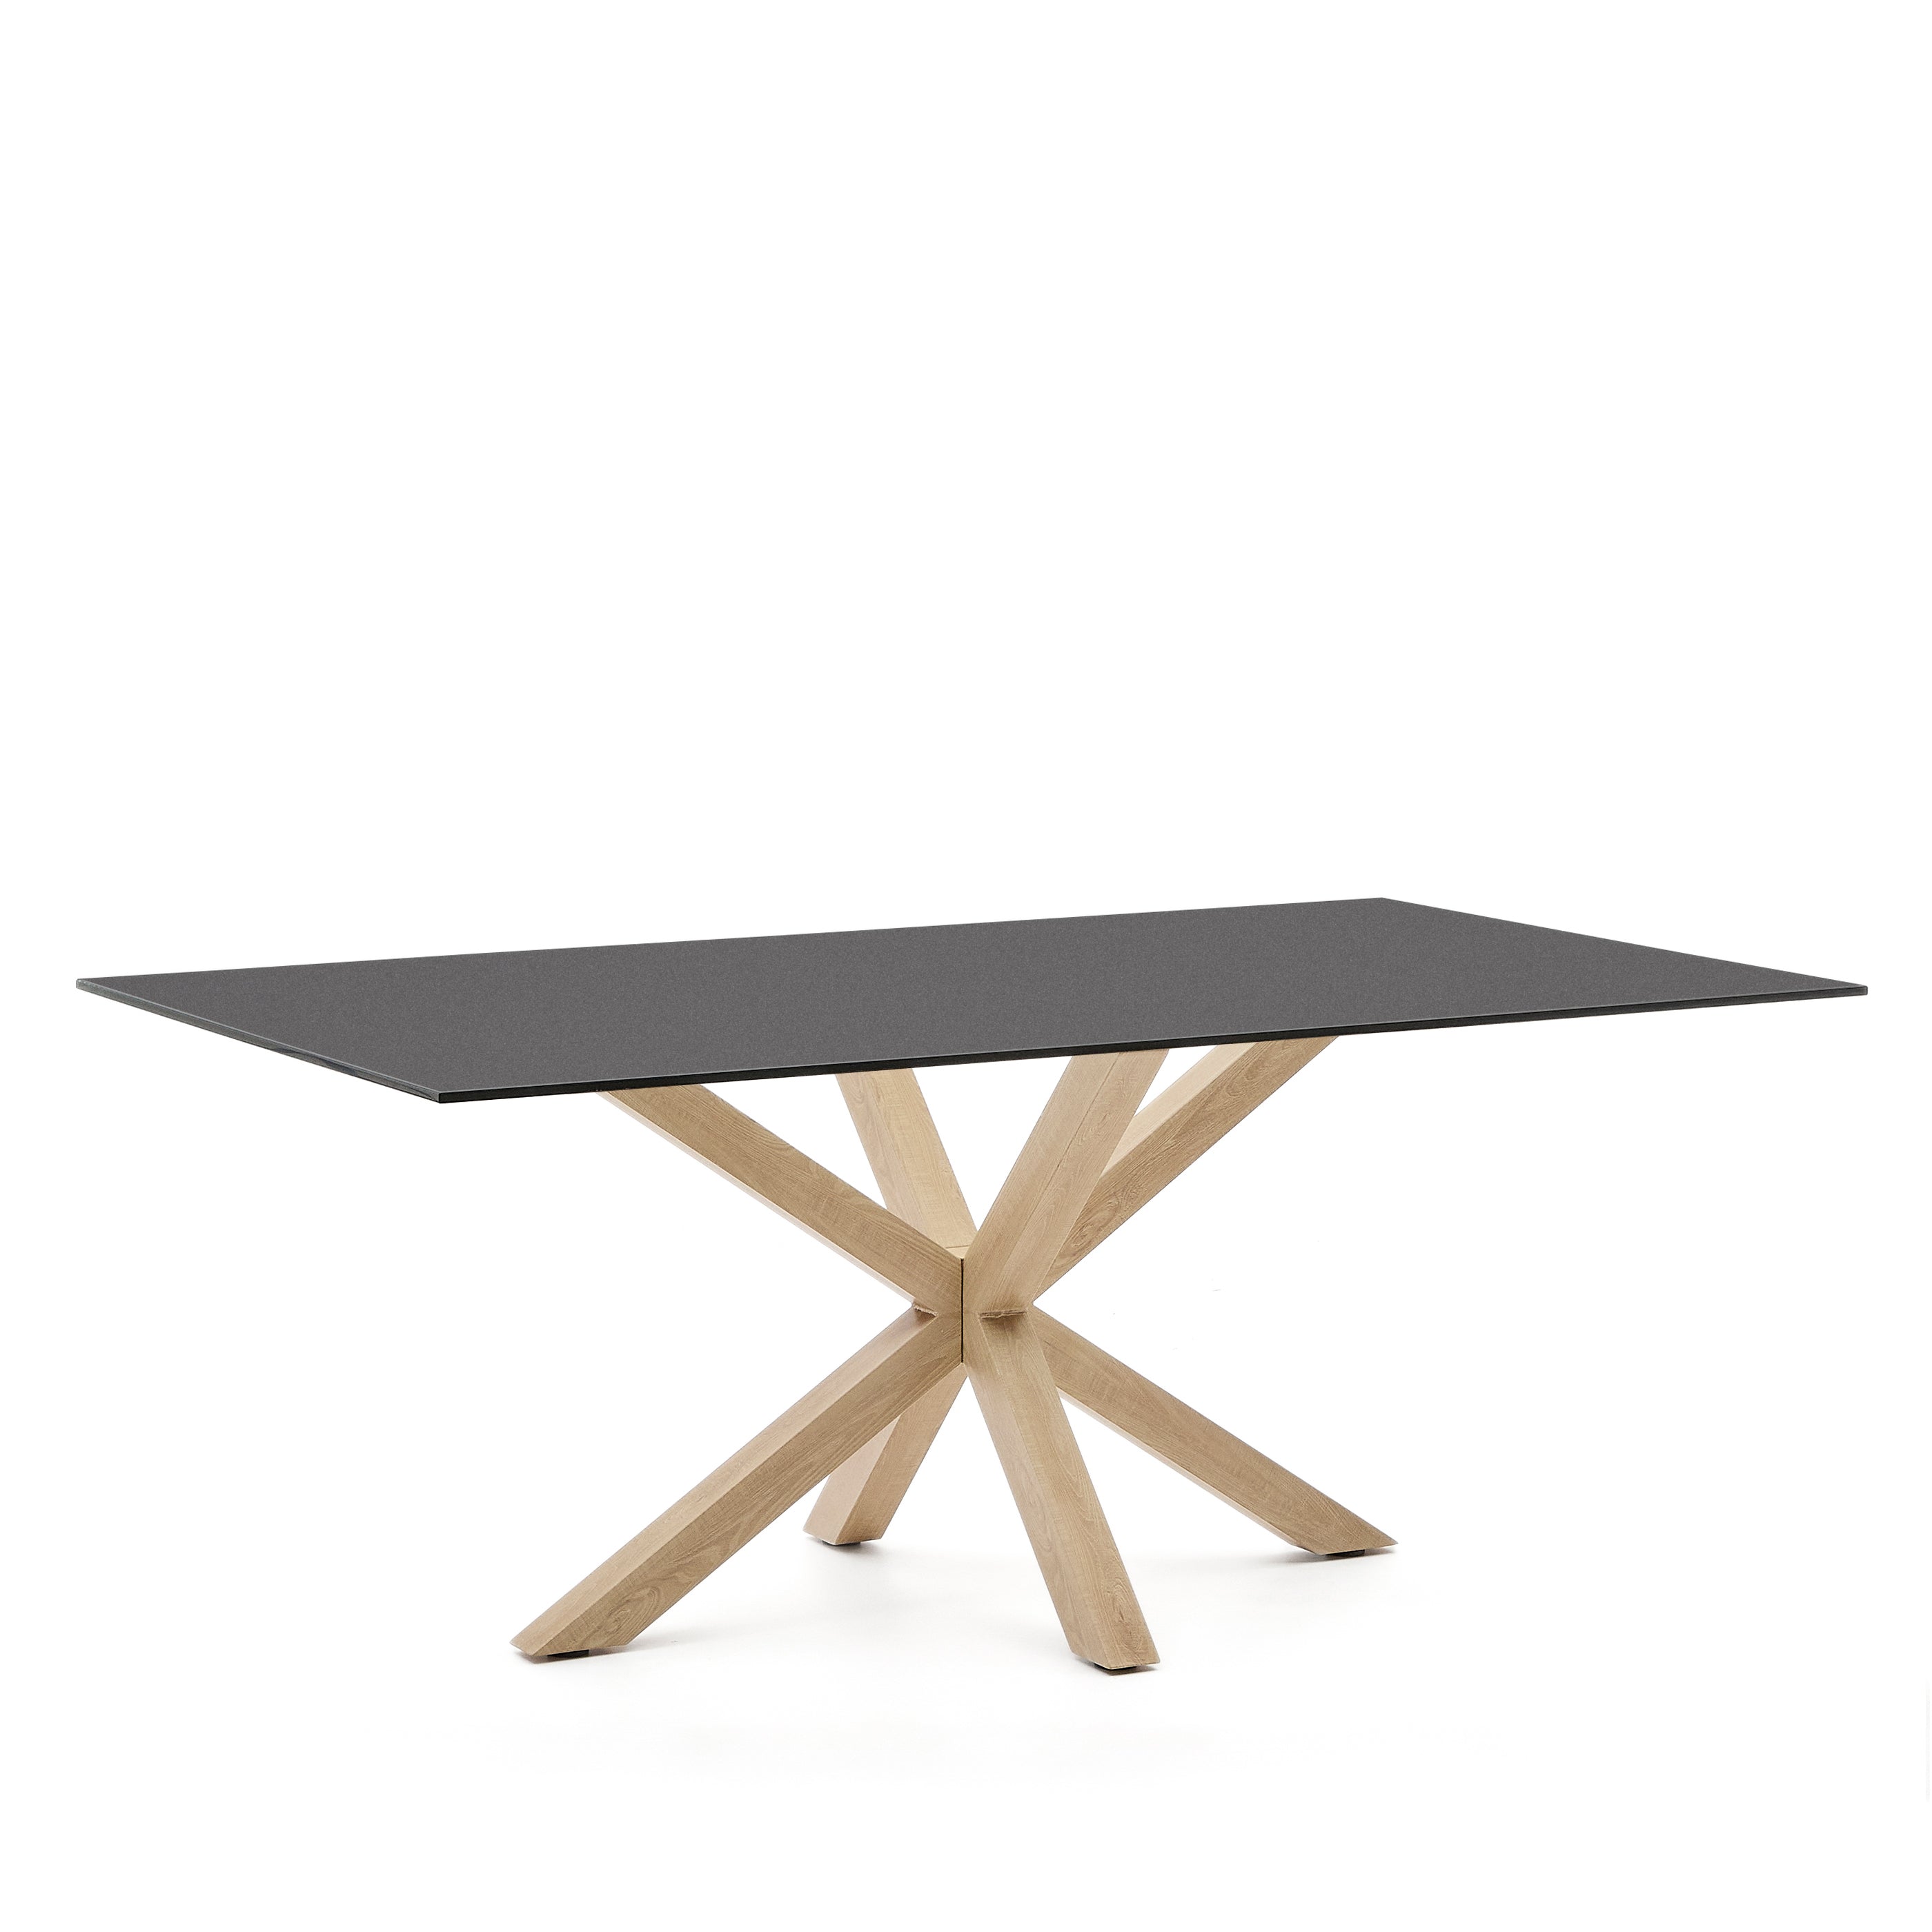 Argo table with black glass and steel legs, wood finish 200 x 100 cm